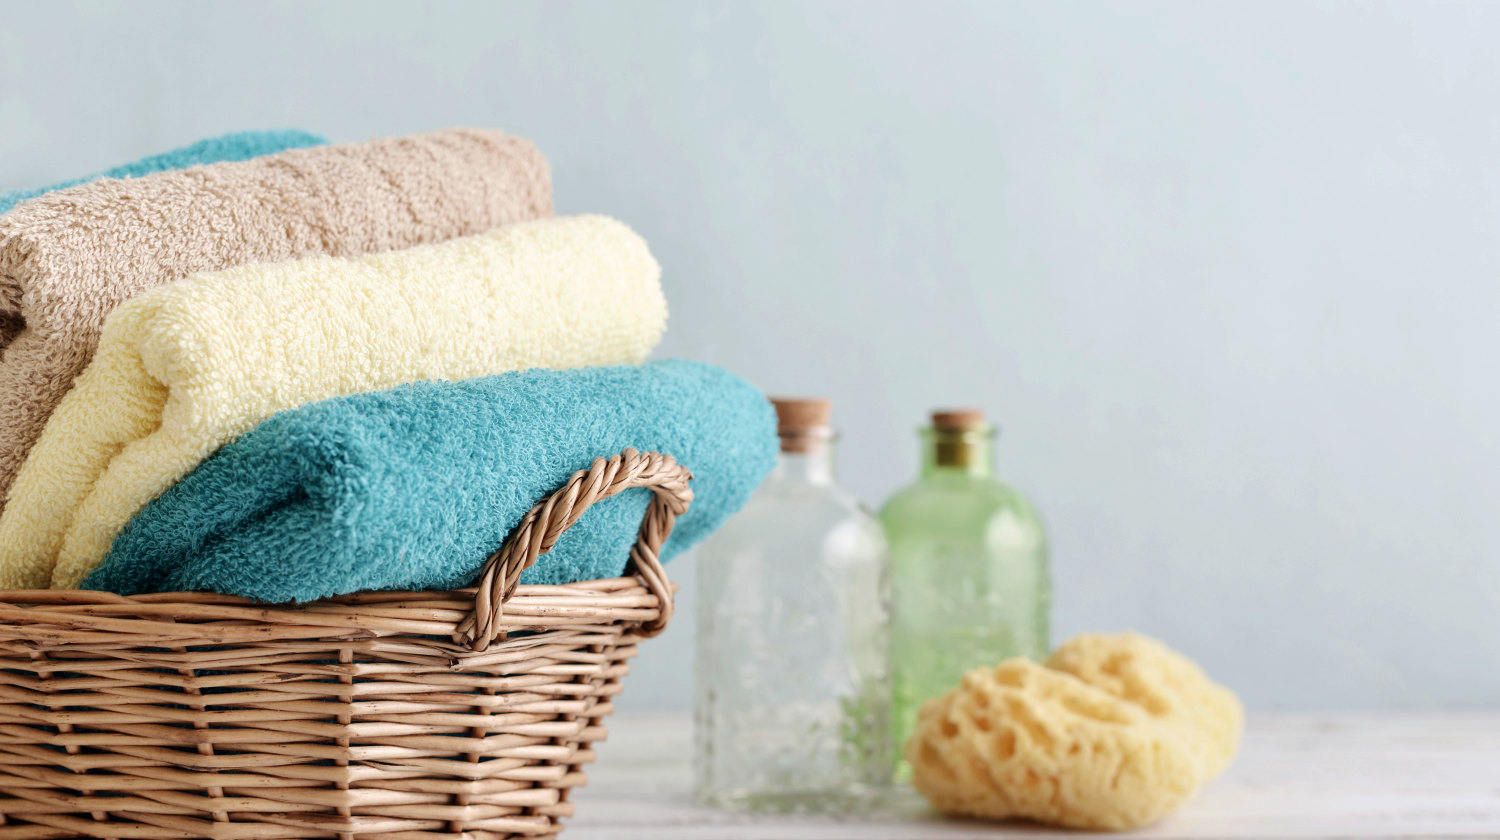 Feature | Bath towels of different colors in wicker basket on light background | How To Get Sour Smell Out Of Towels